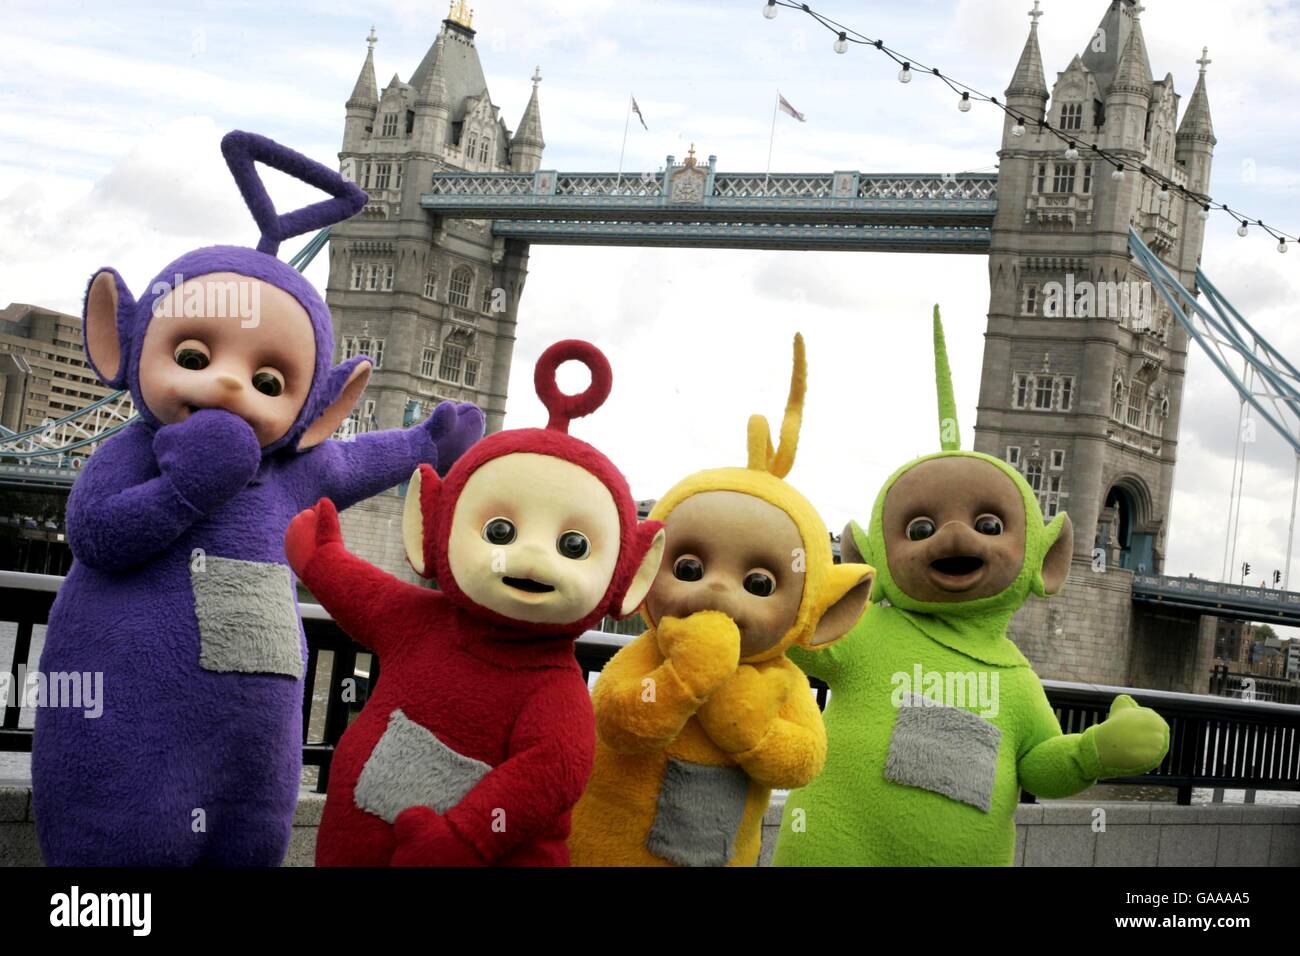 TV favourites the Teletubbies arrived in London today Monday 3rd September for a sightseeing trip around some of the capital's most famous landmarks including Tower Bridge to celebrate their 10th year on television. L-R Tinky Winky, Po, Laa-Laa and Dipsy Stock Photo